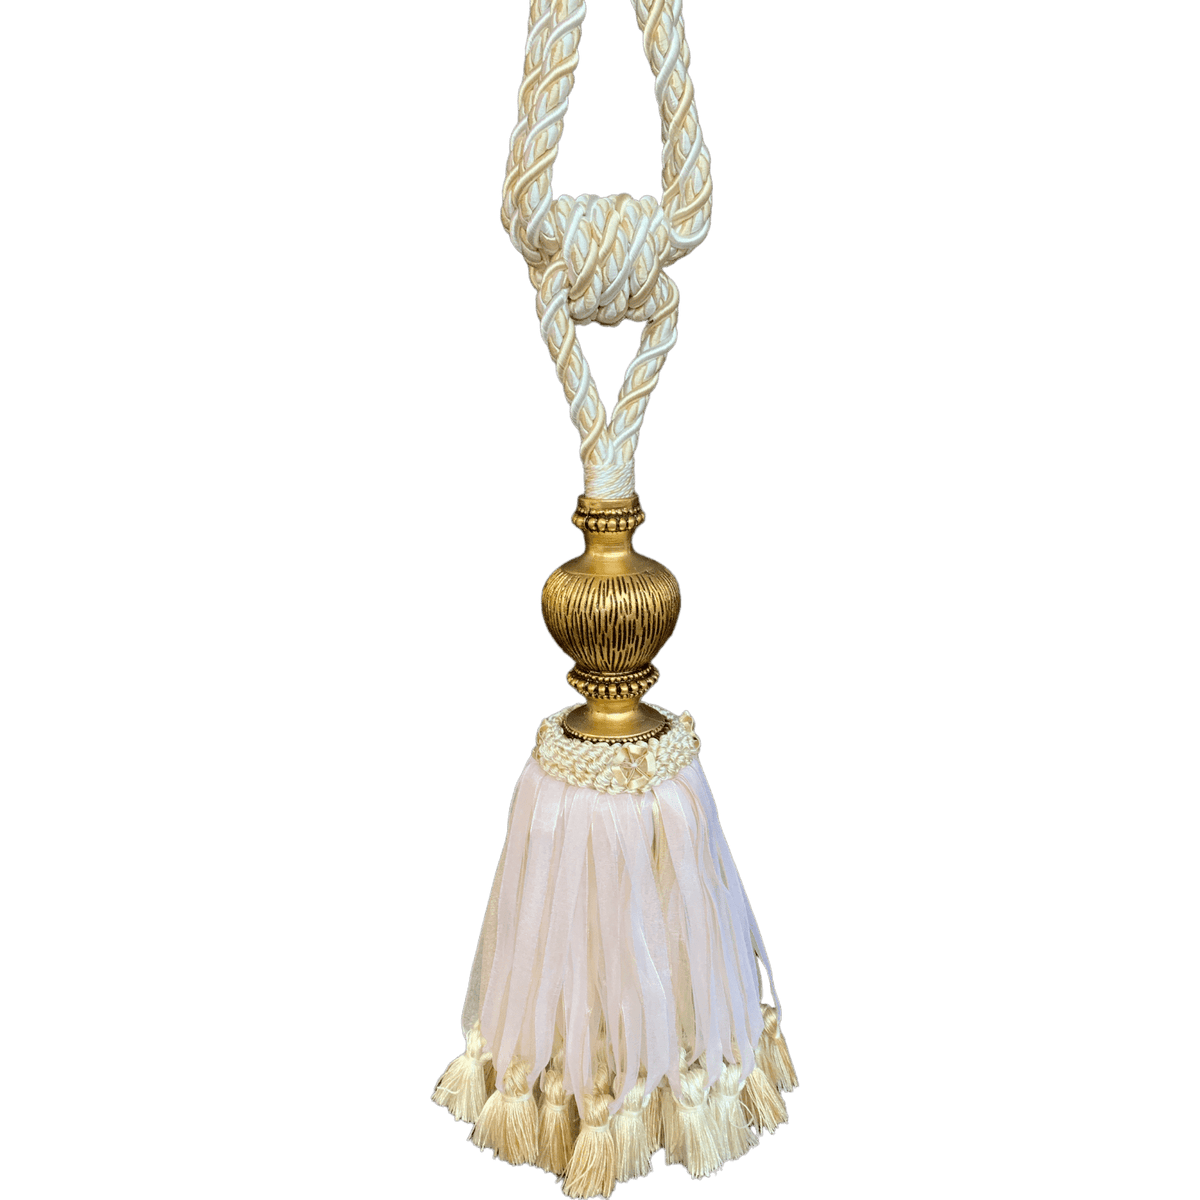 White and gold curtain tie back